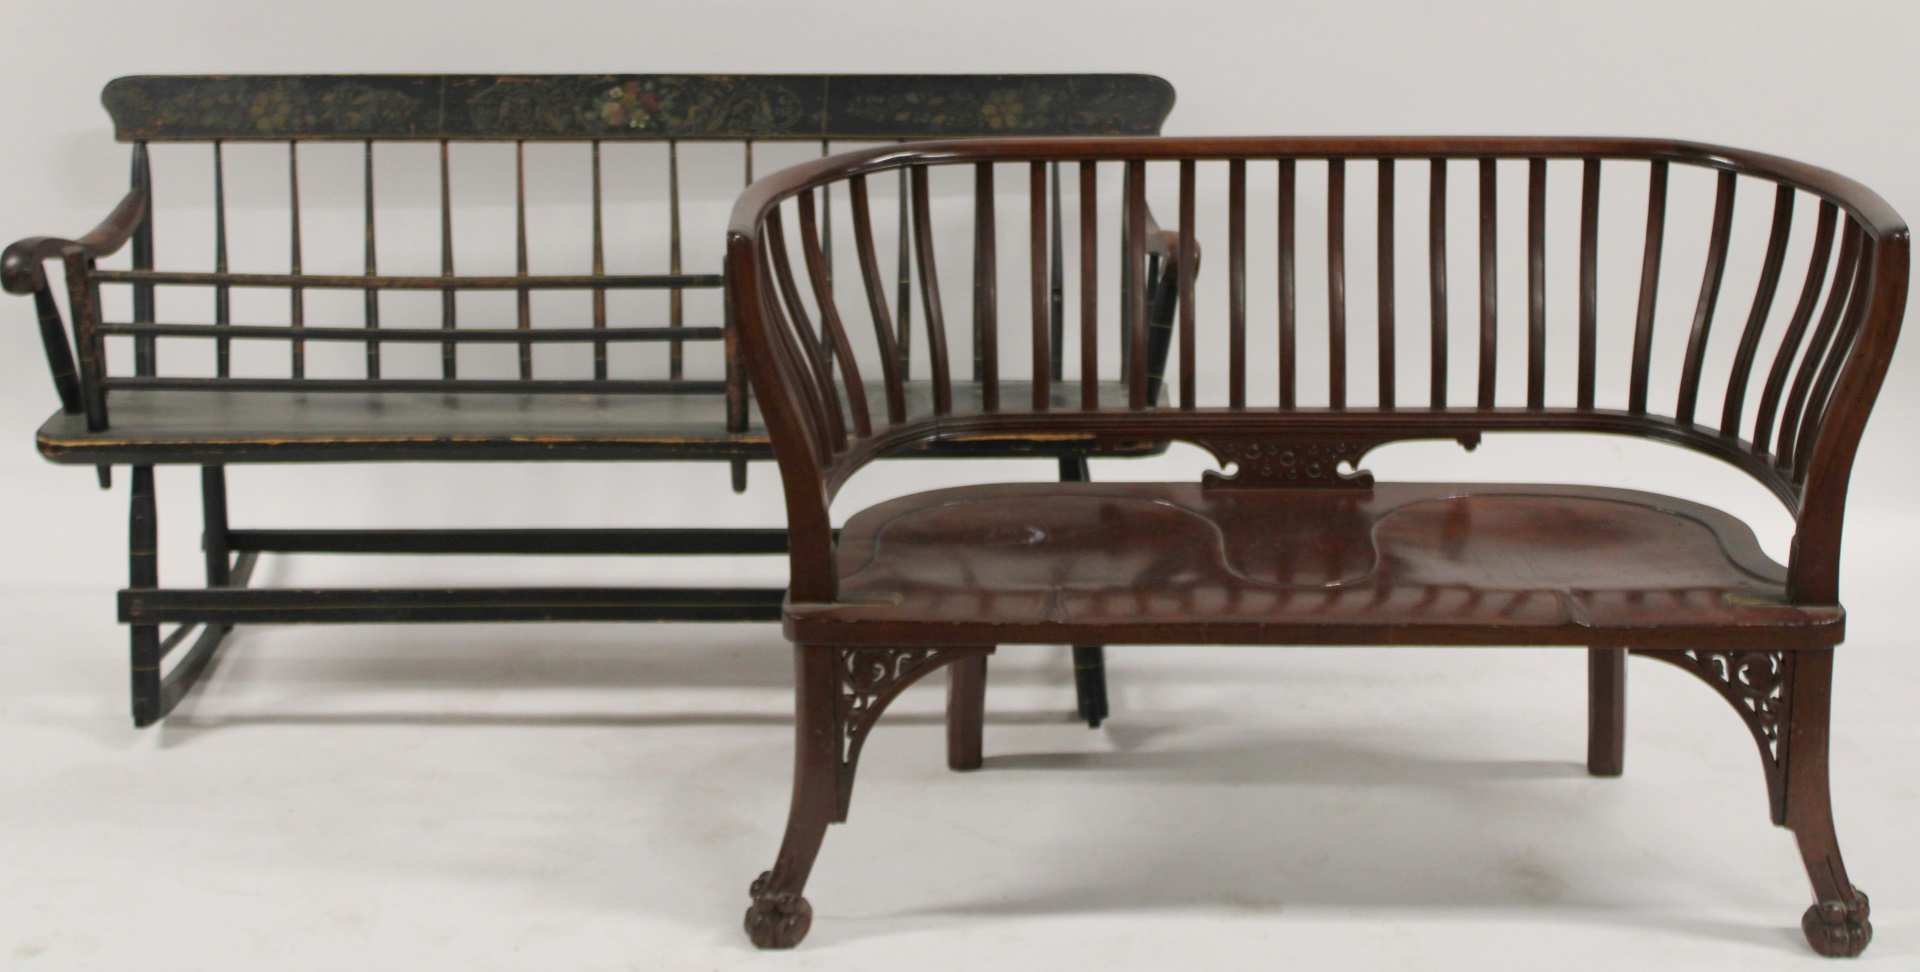 2 ANTIQUE WOOD BENCHES To include 3b7c64